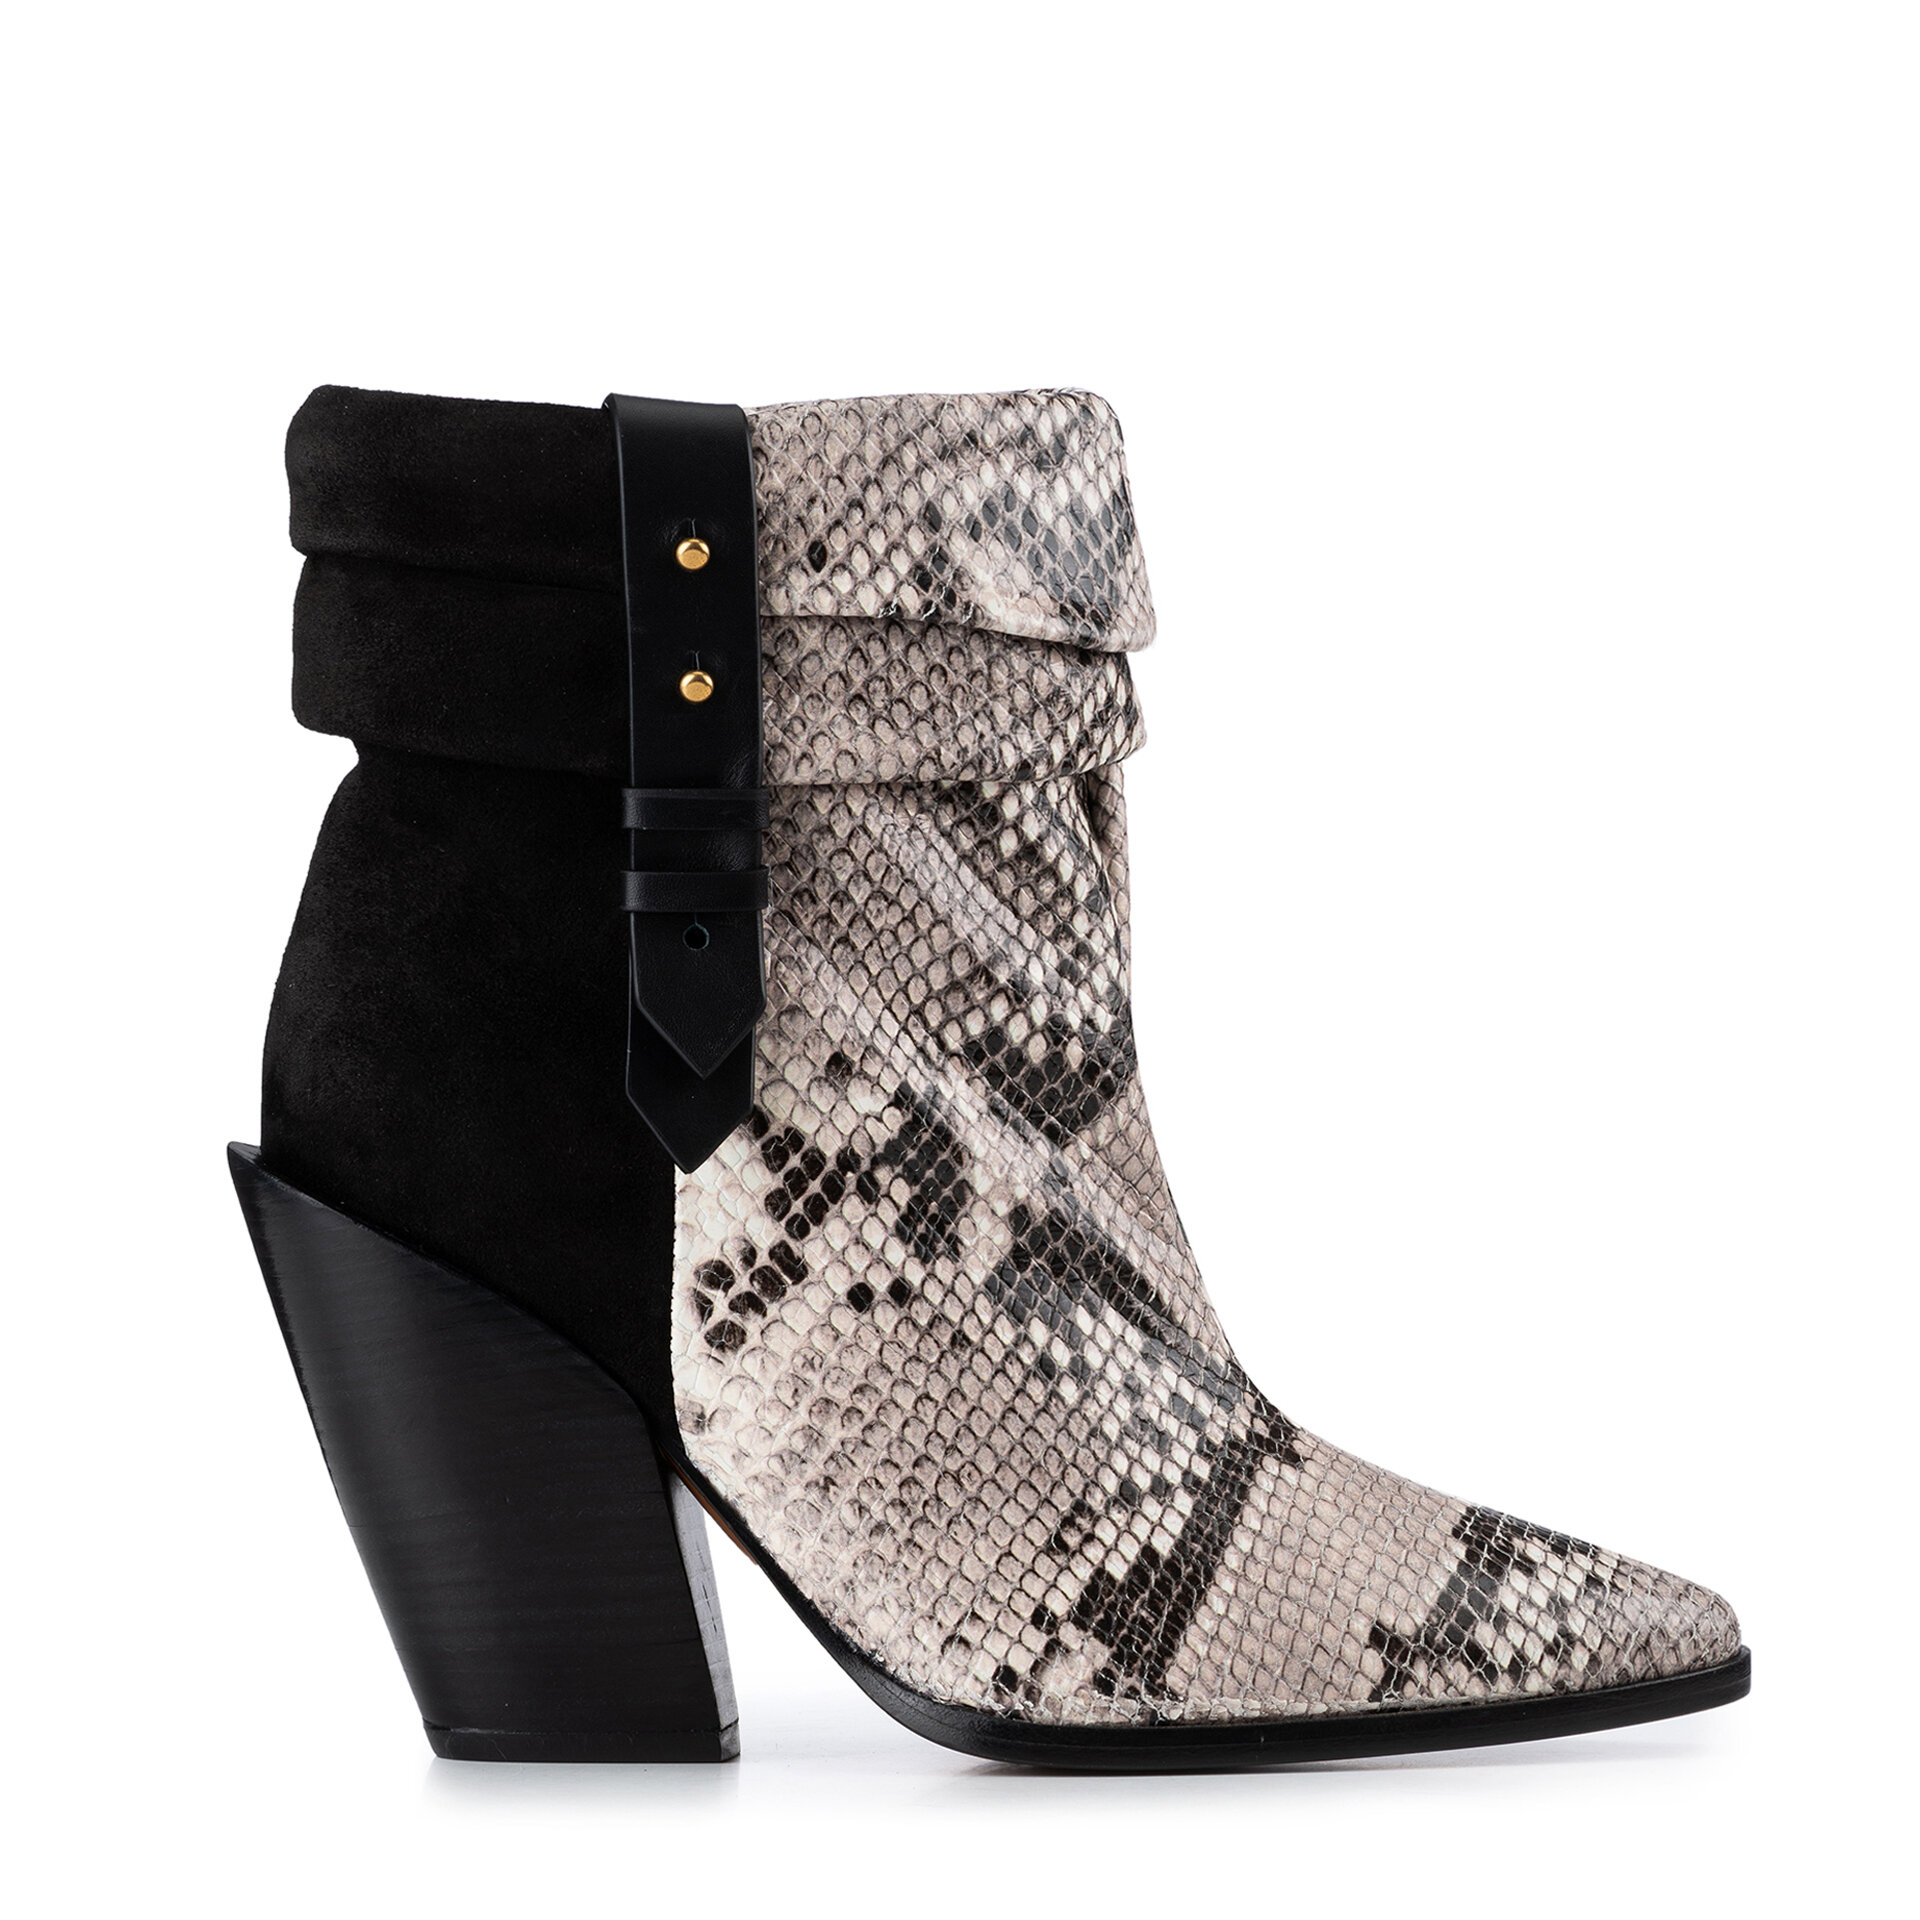 Black Suede and Reptile Ankle Boot